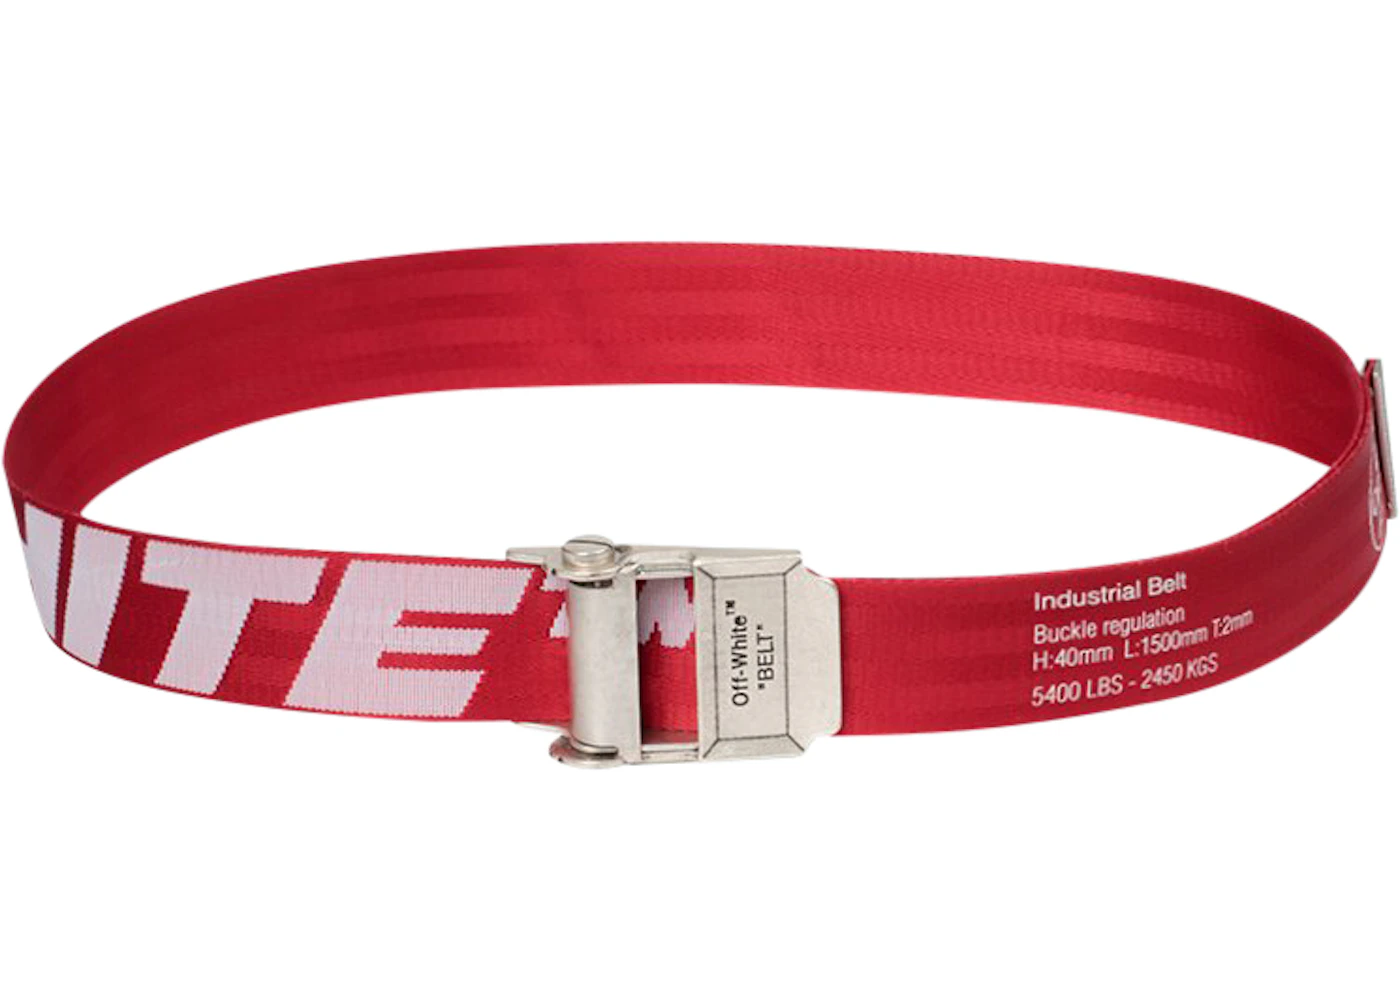 OFF-WHITE Short 2.0 Industrial Belt Red/White - SS20 - US